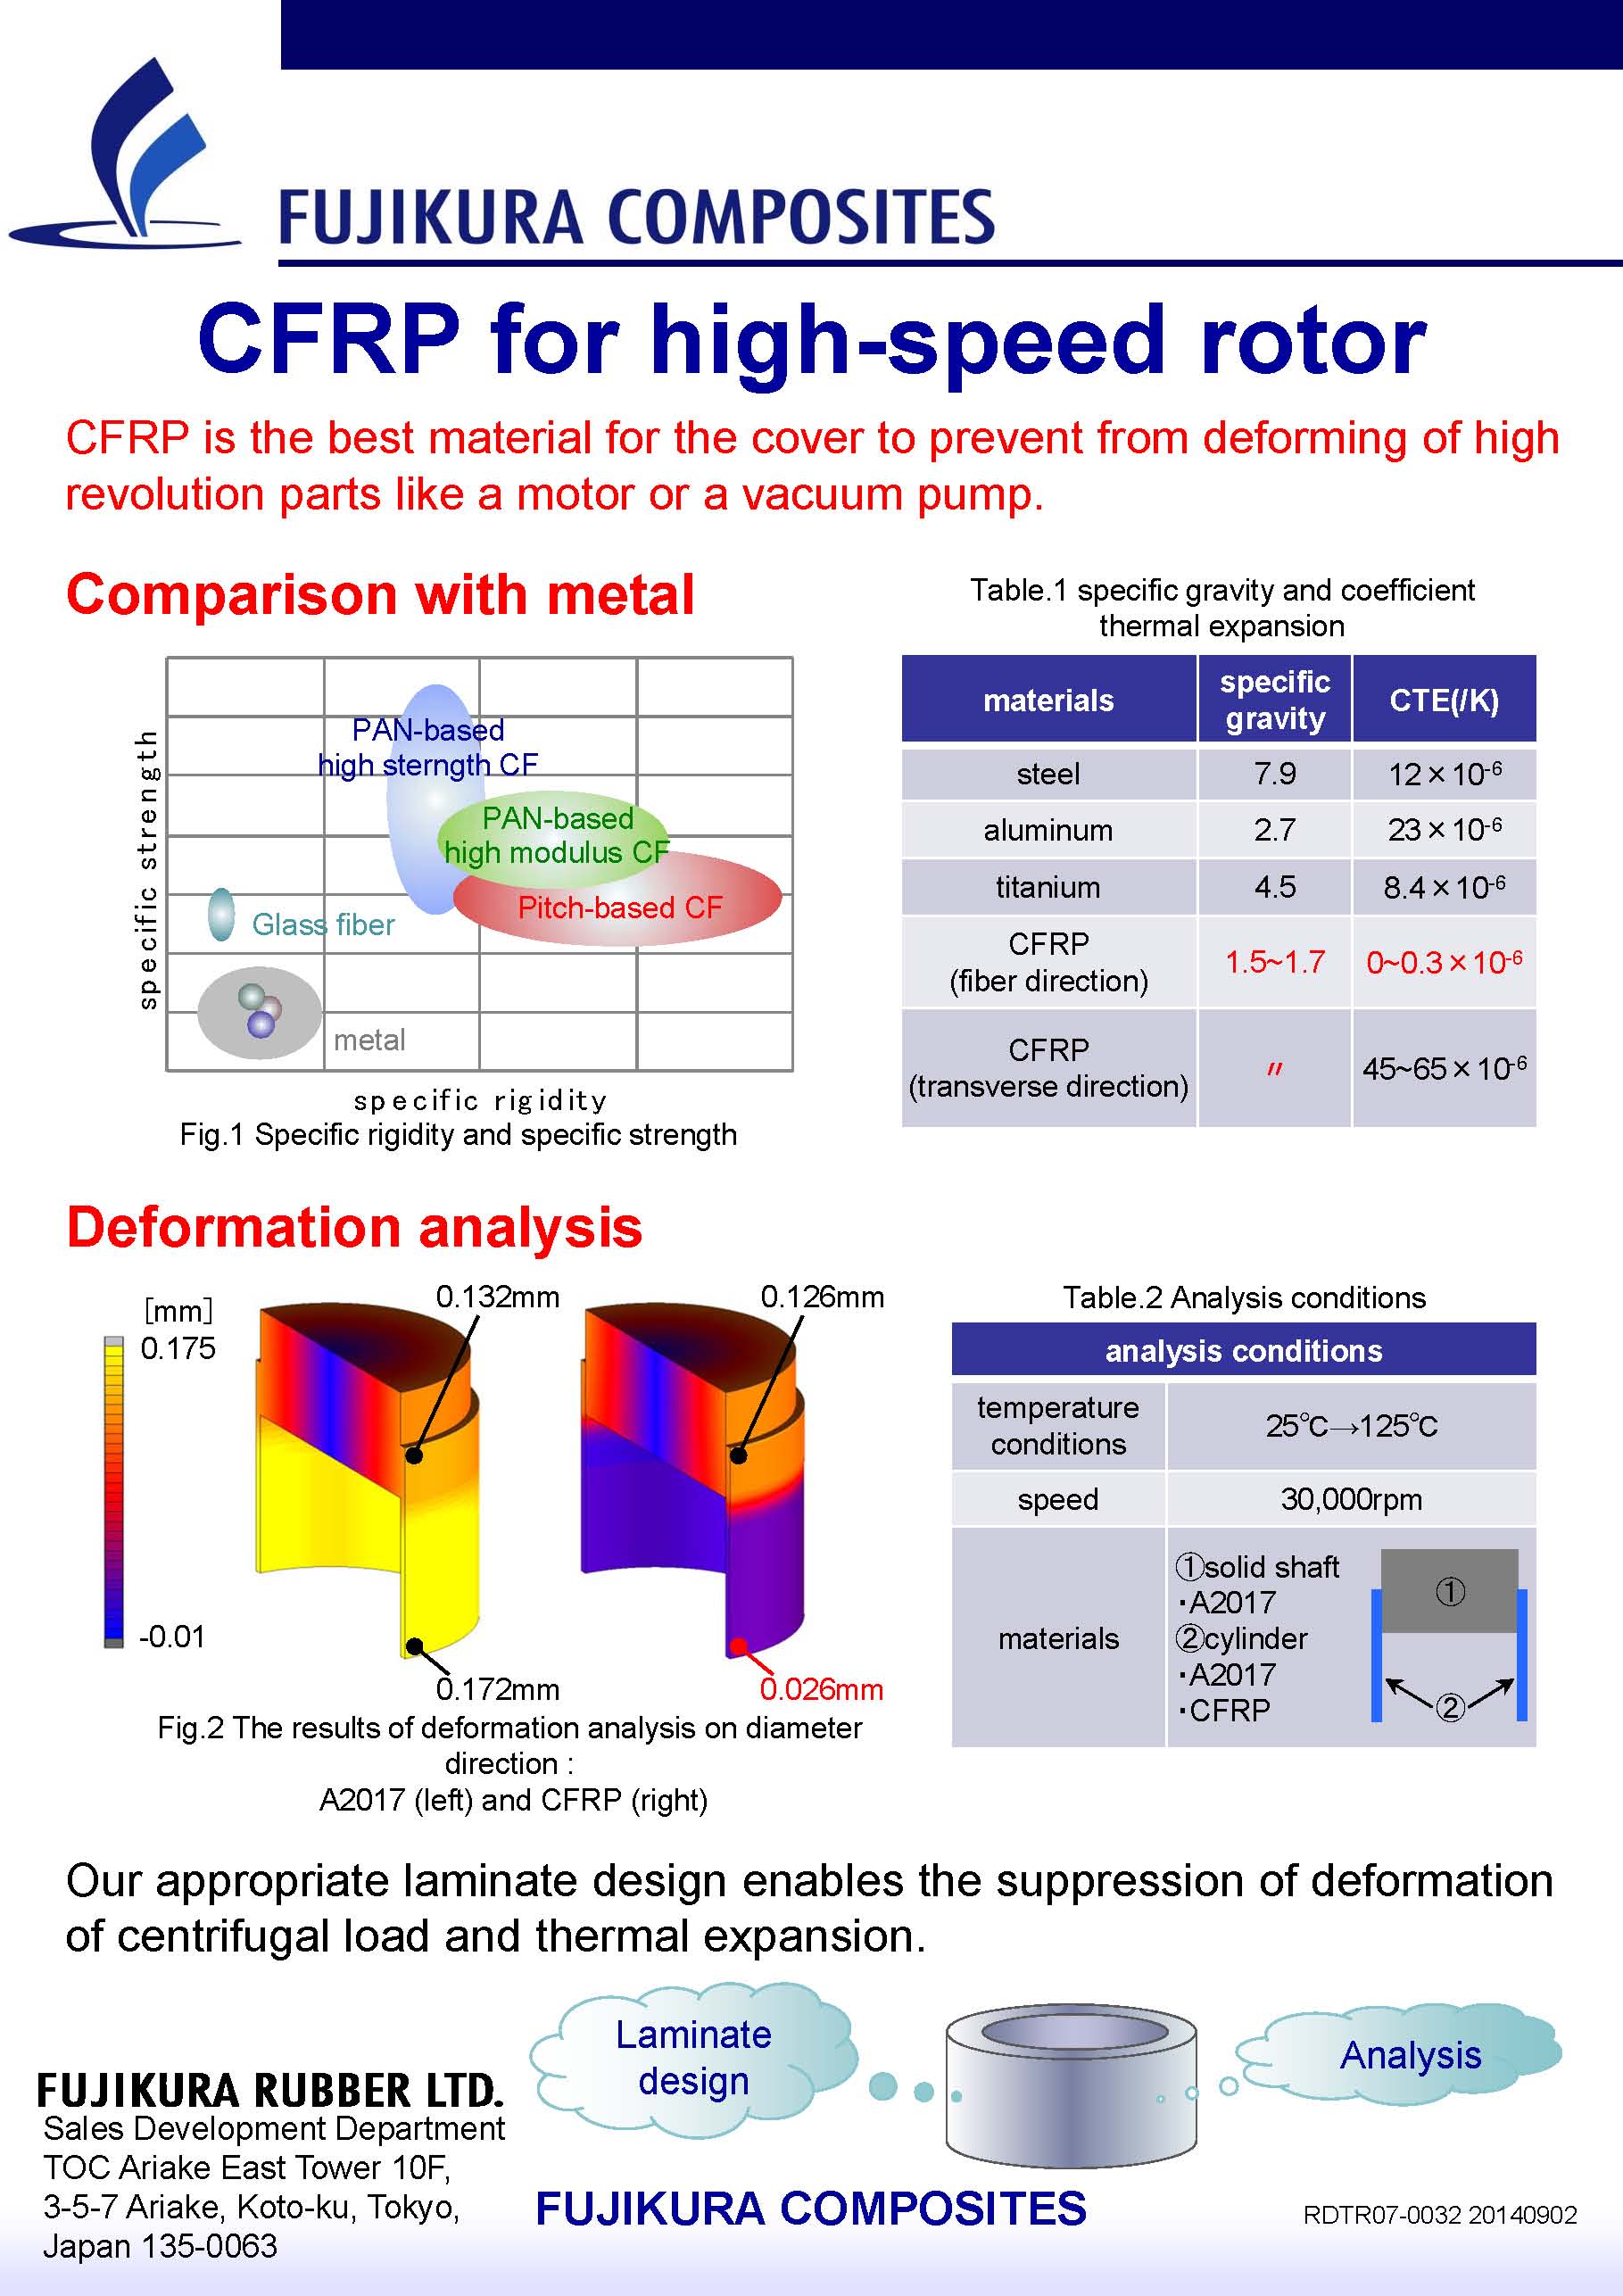 CFRP for high-speed rotor